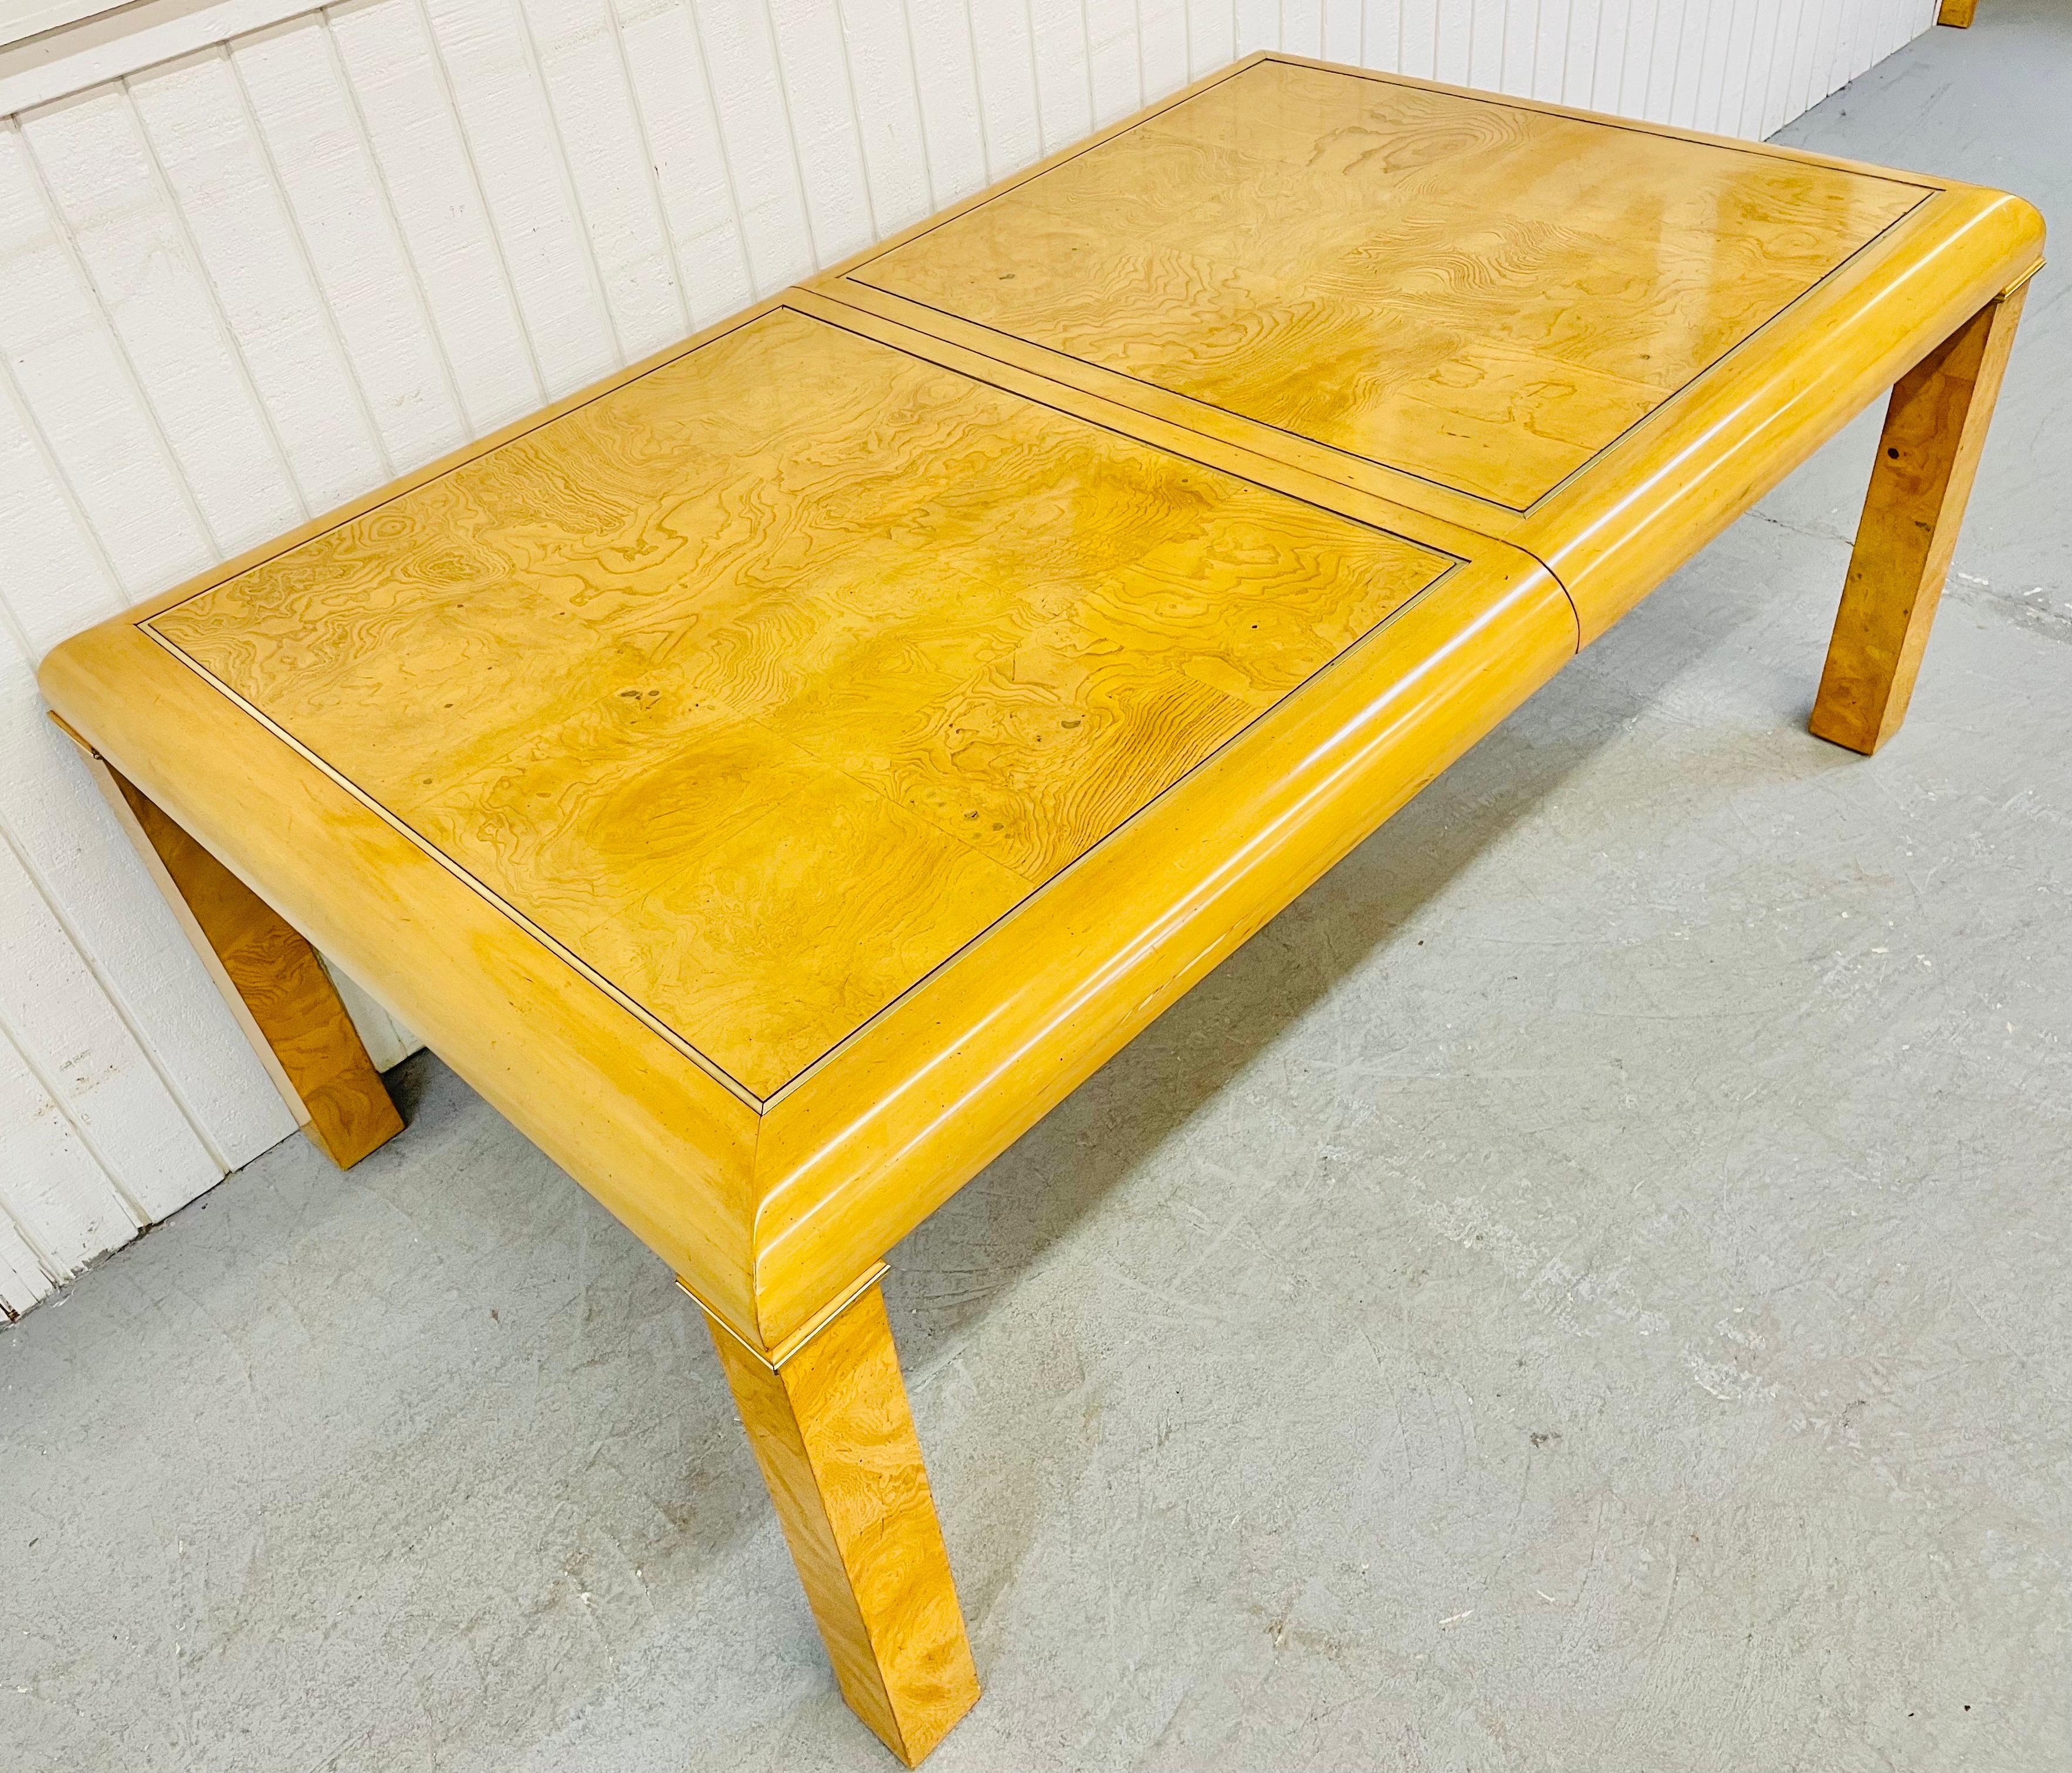 This listing is for a vintage American of Martinsville Burled Wood Dining Table. Featuring a beautiful burled wood rectangular top, brass accents, burled legs, and one leaf that extends the table up to 94” L.